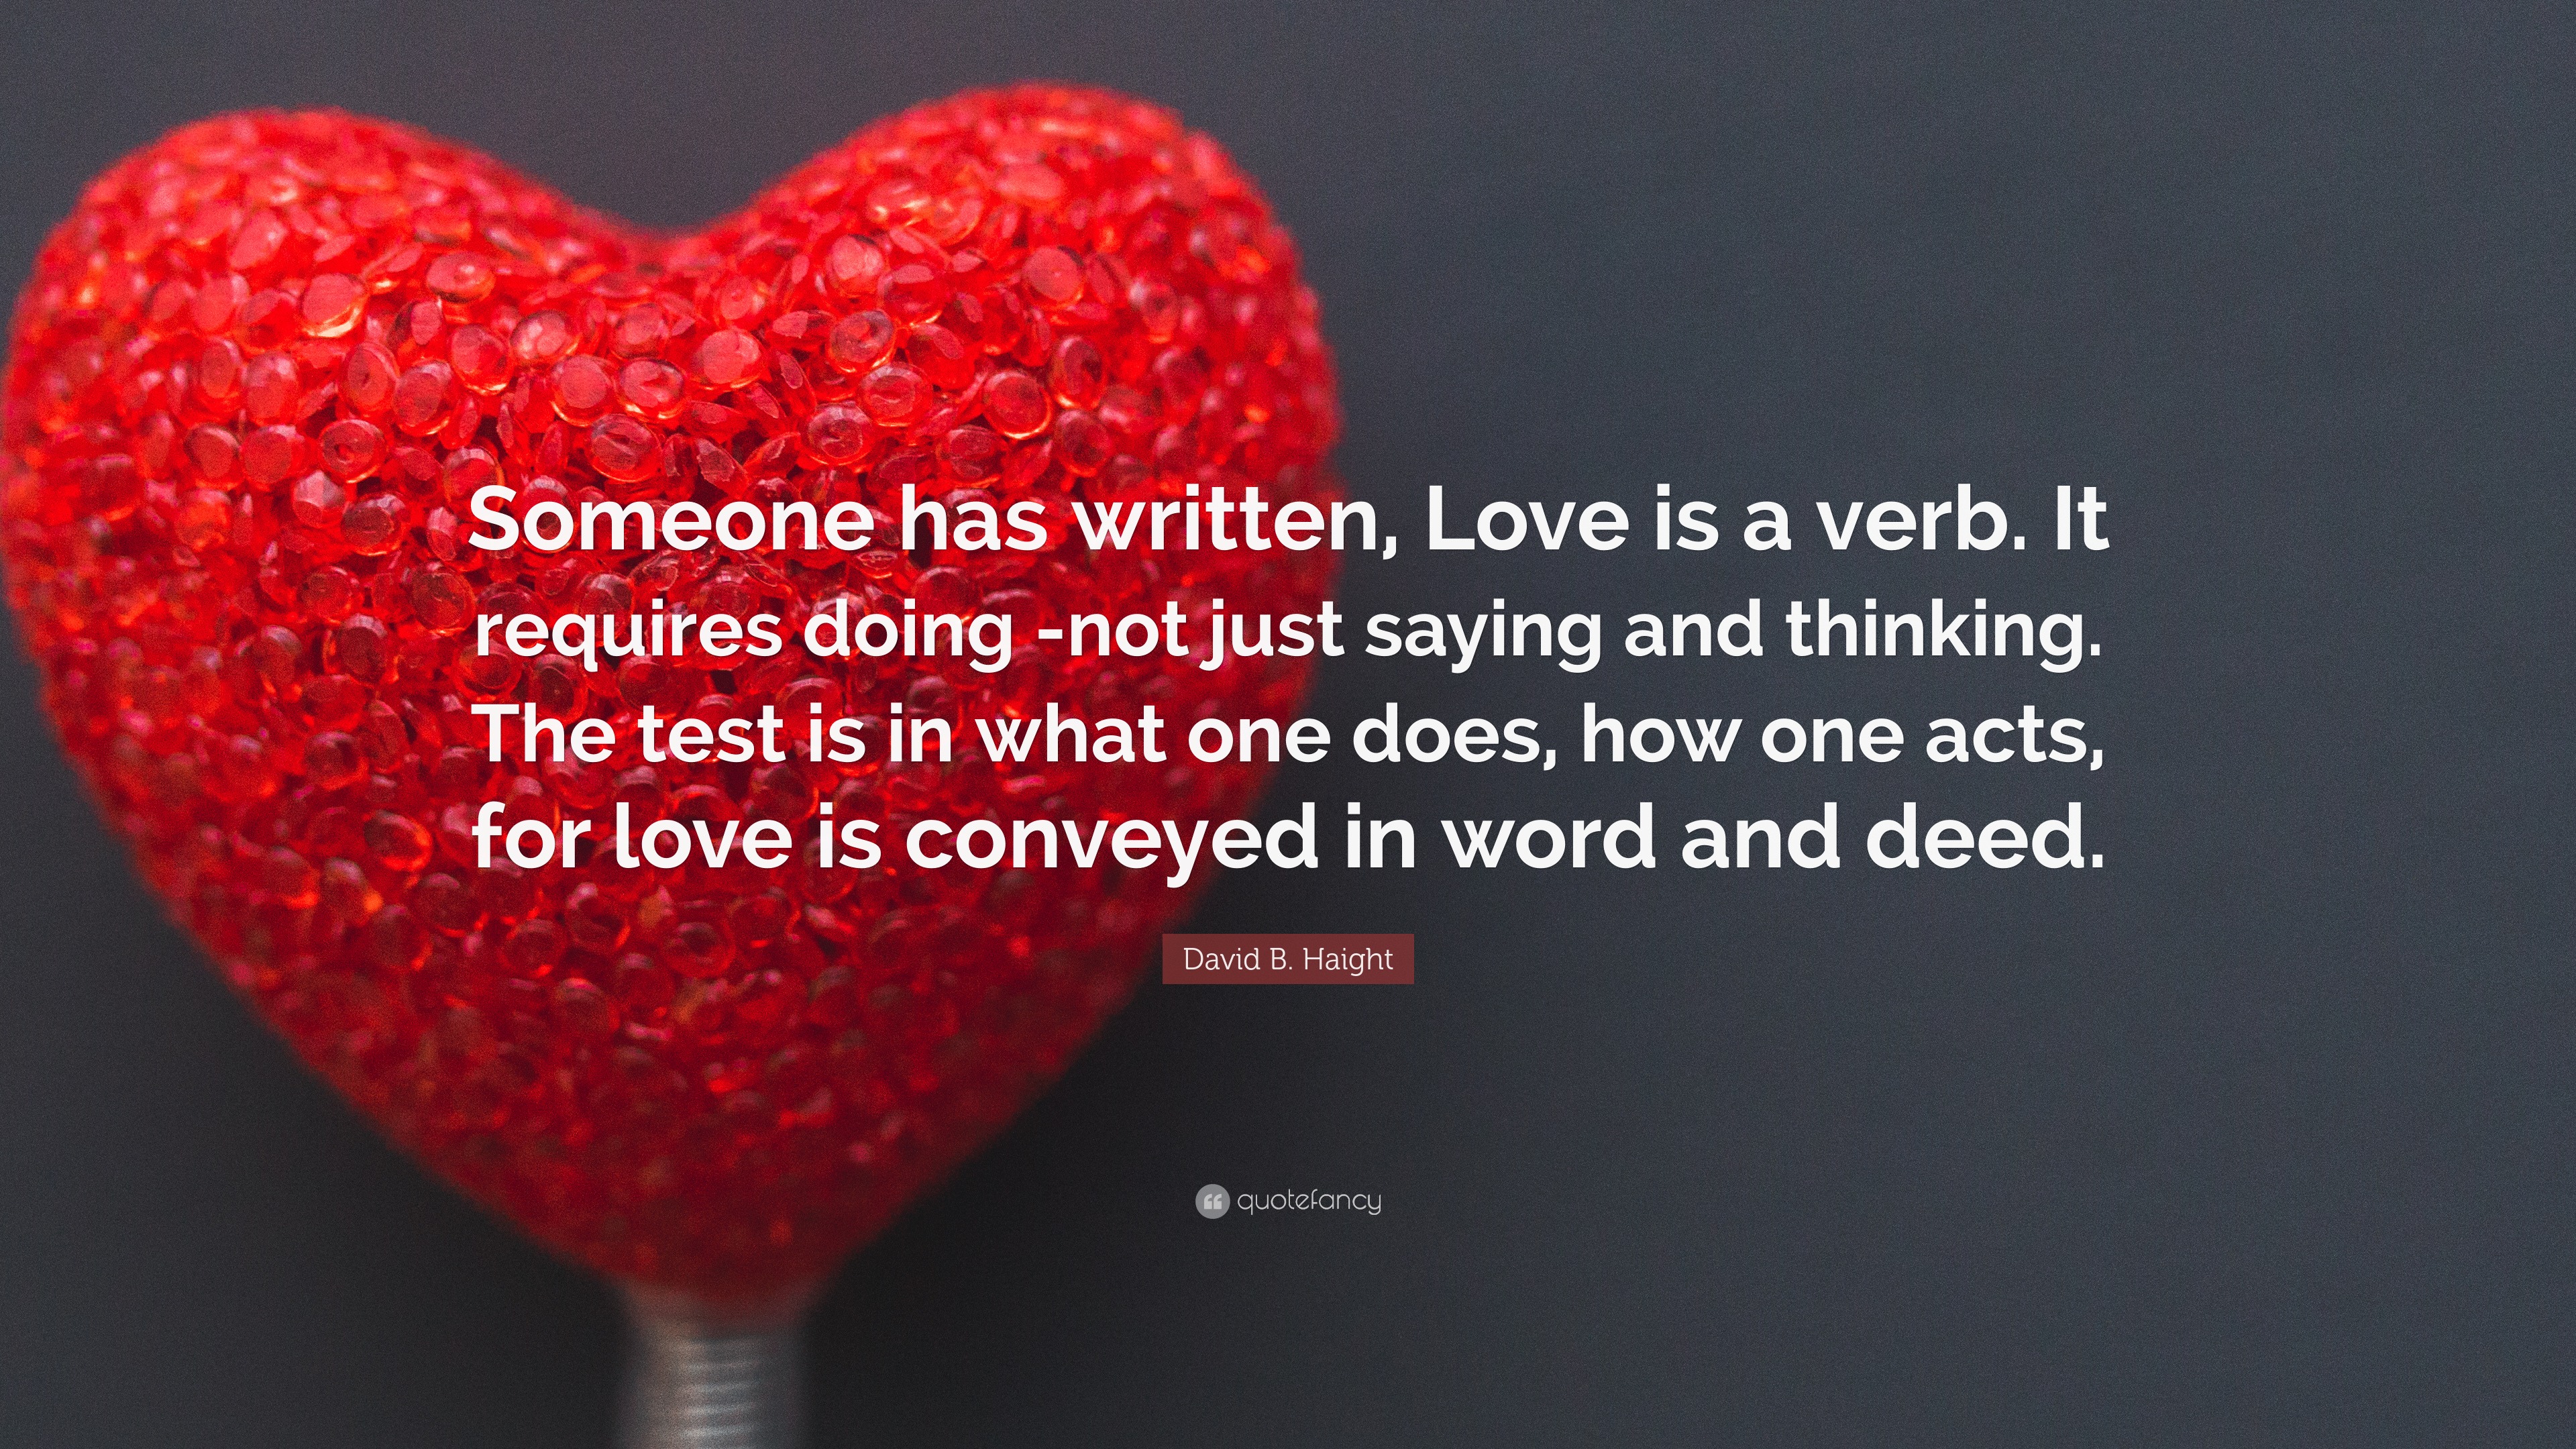 David B. Haight Quote: “Someone has written, Love is a verb. It requires  doing -not just saying and thinking. The test is in what one does, how ”